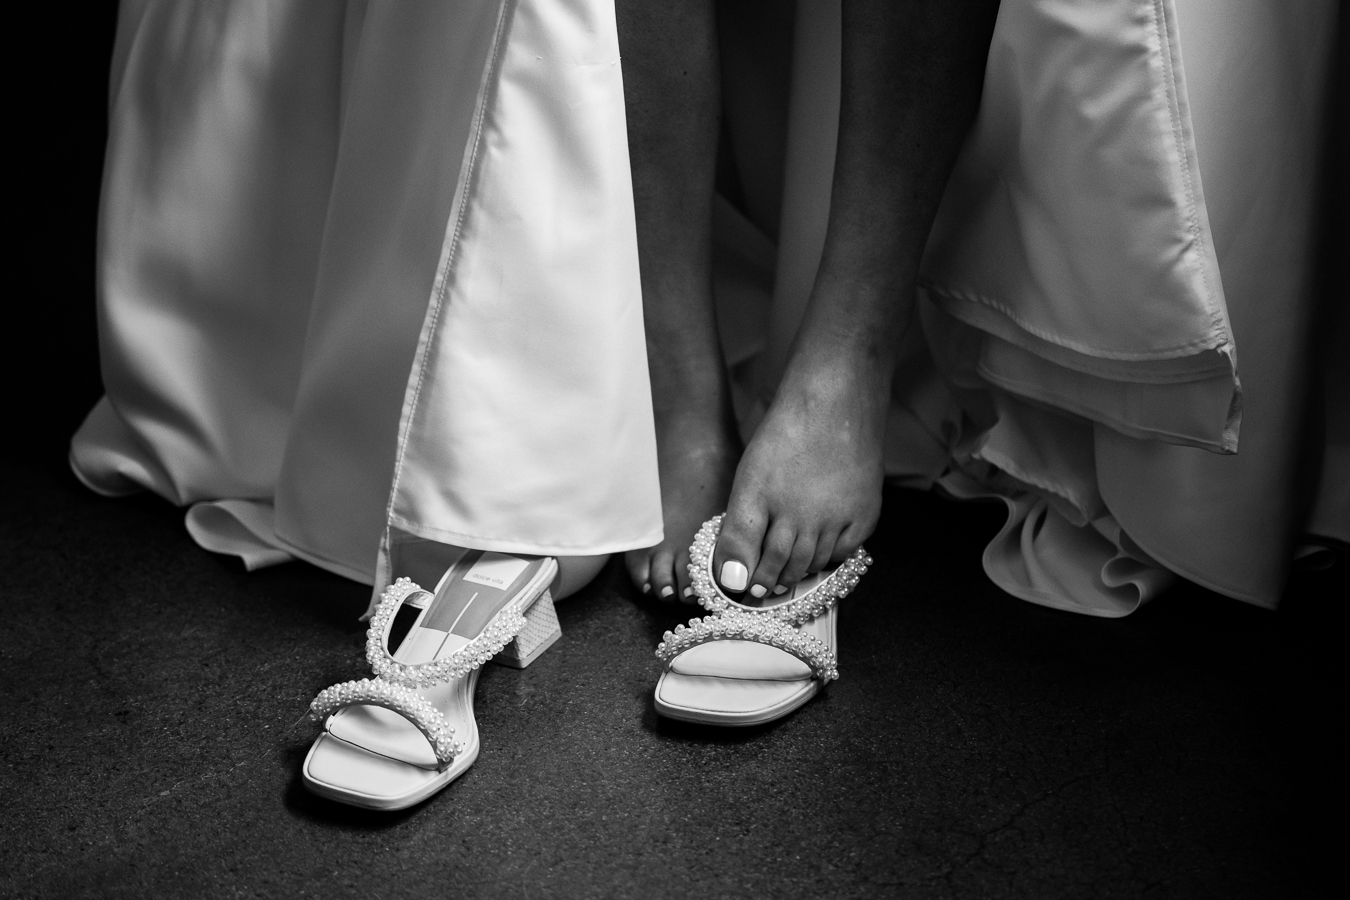 Wedding photographer, lisa rhinehart, captures this black and white image of the bride putting on her pearl stoned heels before her wedding ceremony at Middleburg barn